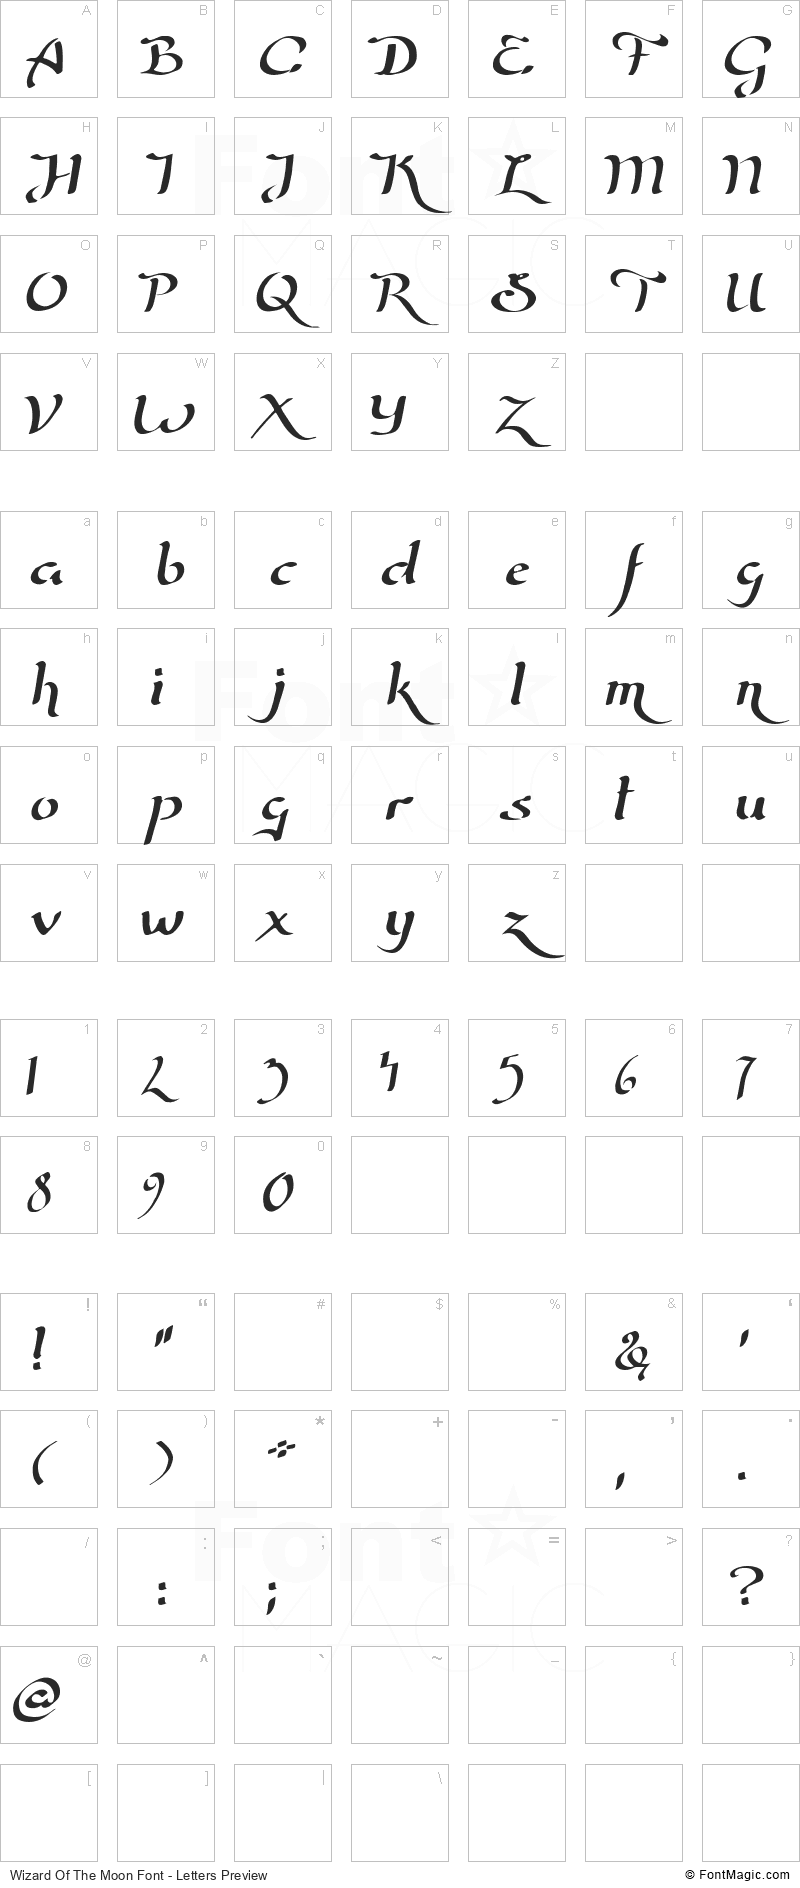 Wizard Of The Moon Font - All Latters Preview Chart